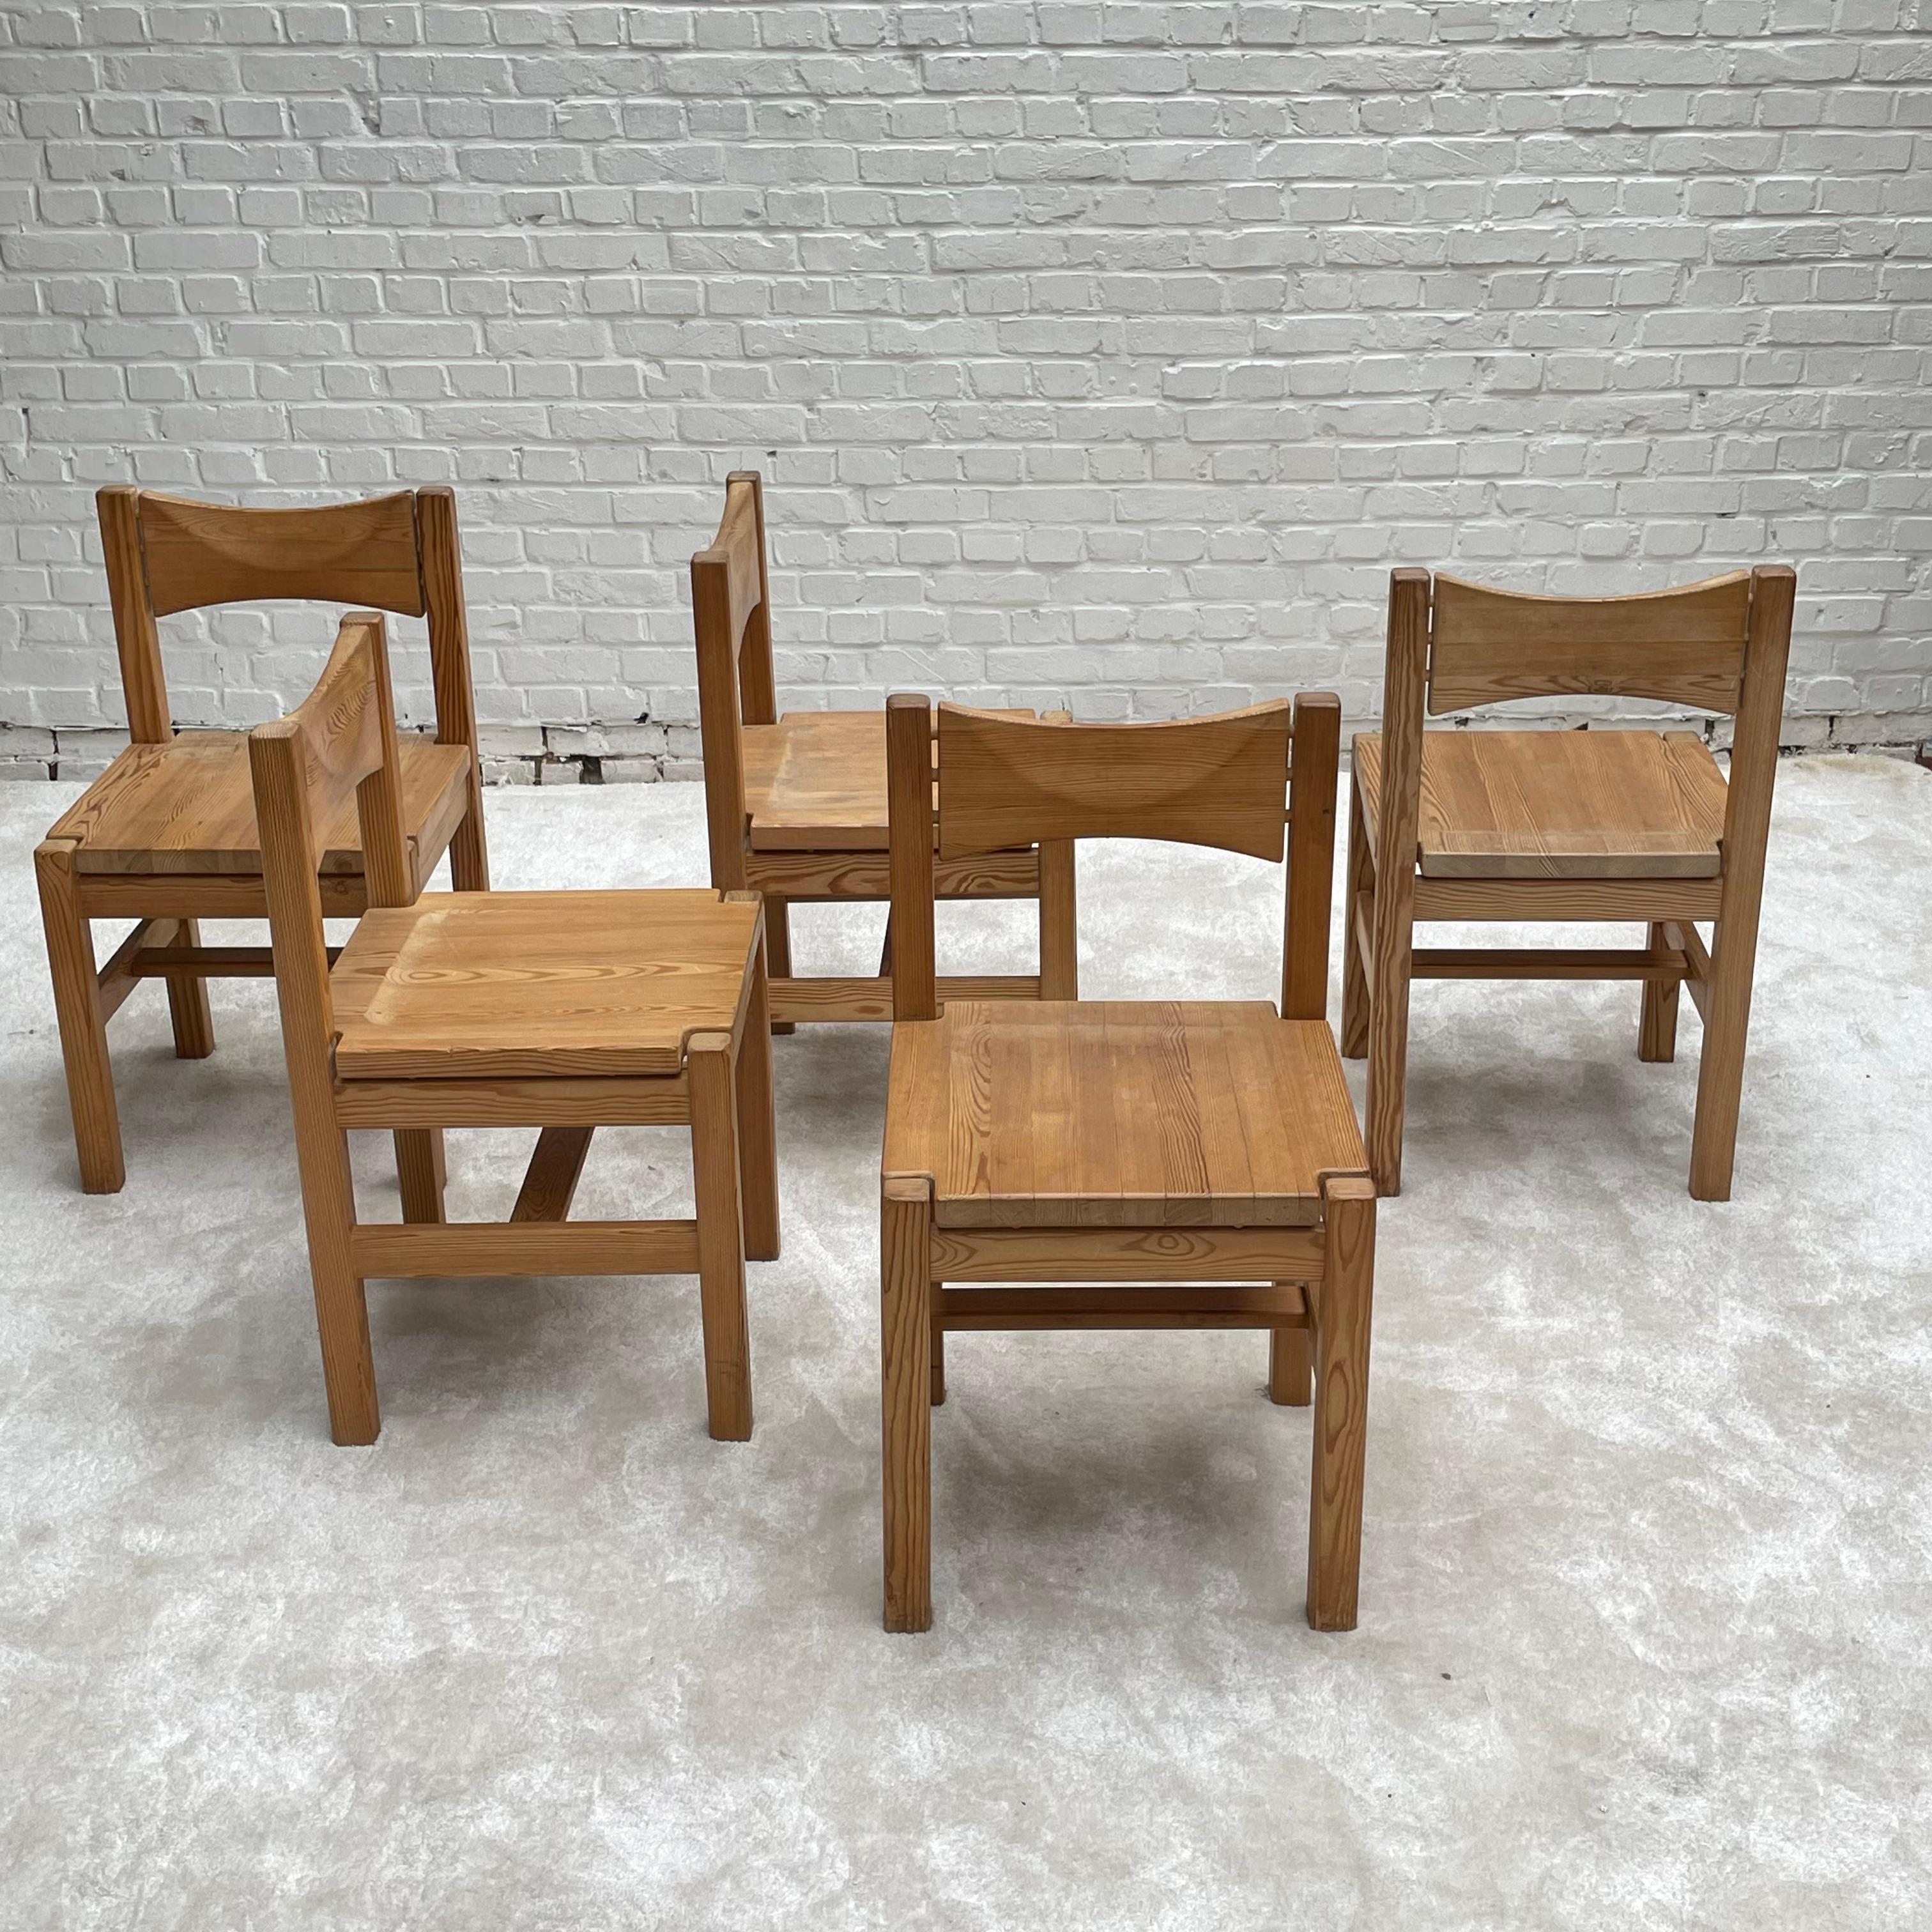 Mid-20th Century Dining Set by Ilmar Tapiovaara for Laukaan Puu Finnland For Sale